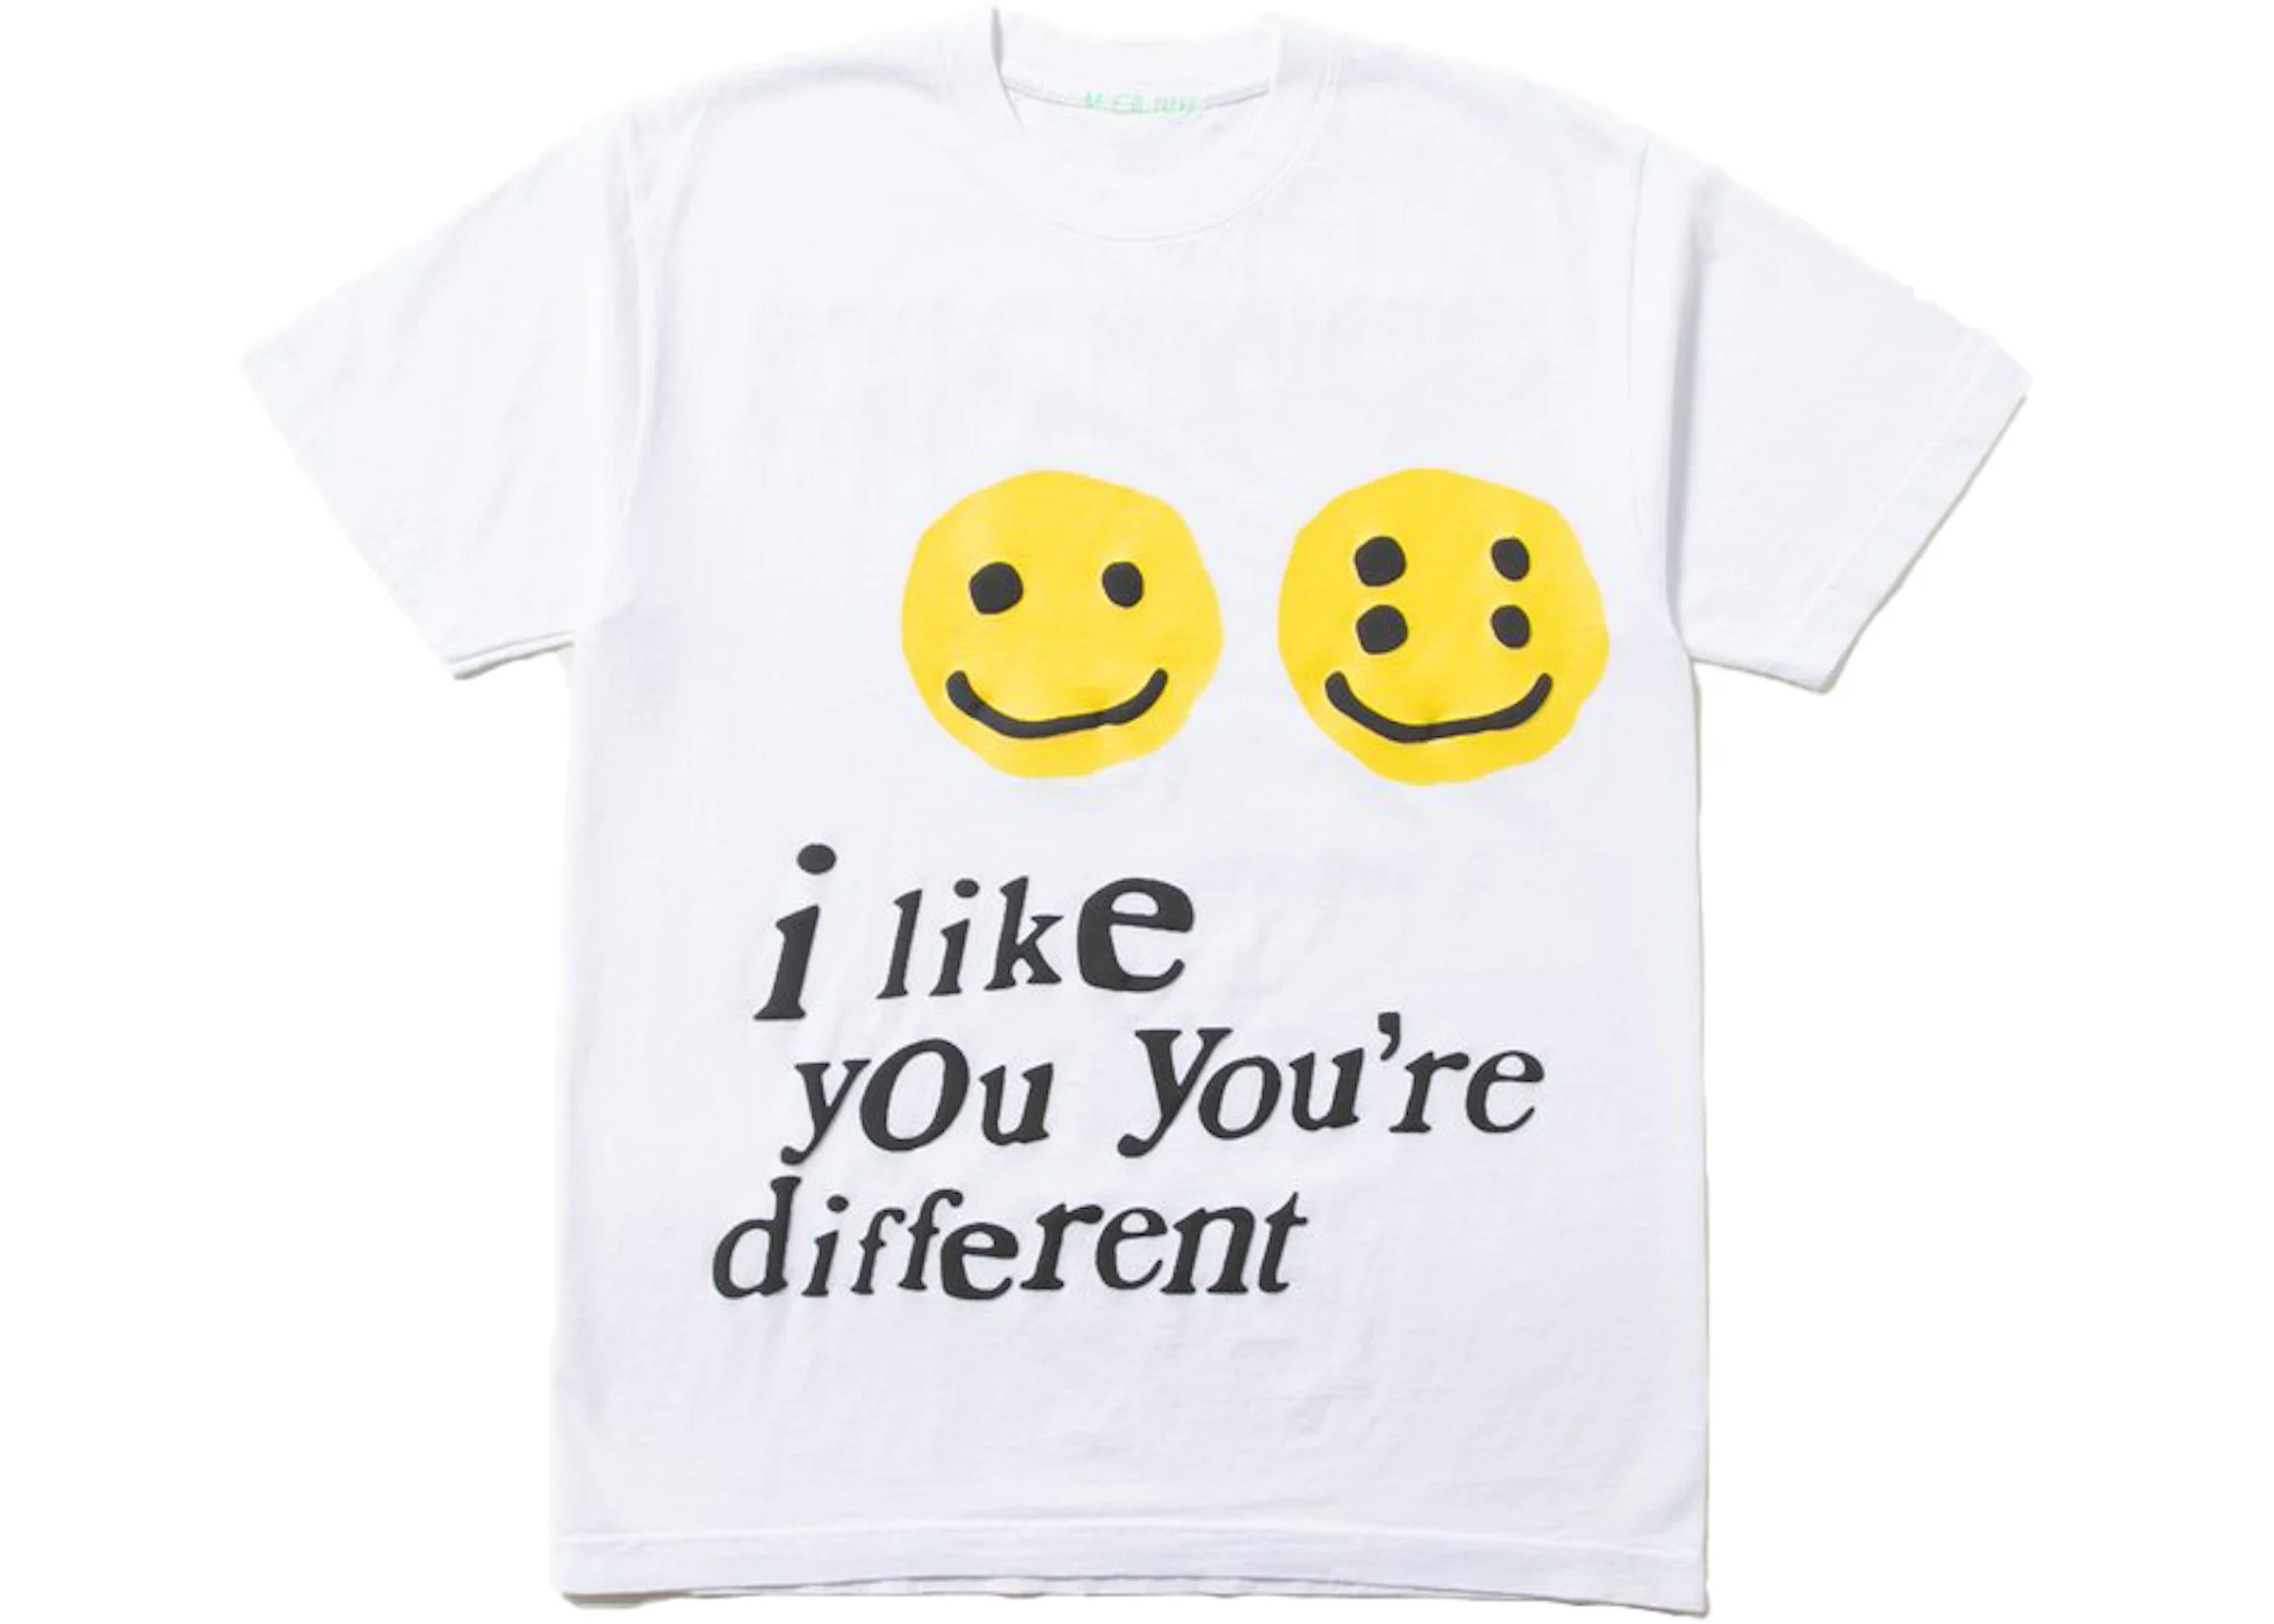 Cactus Plant Flea Market I Like You You're Different Tee White